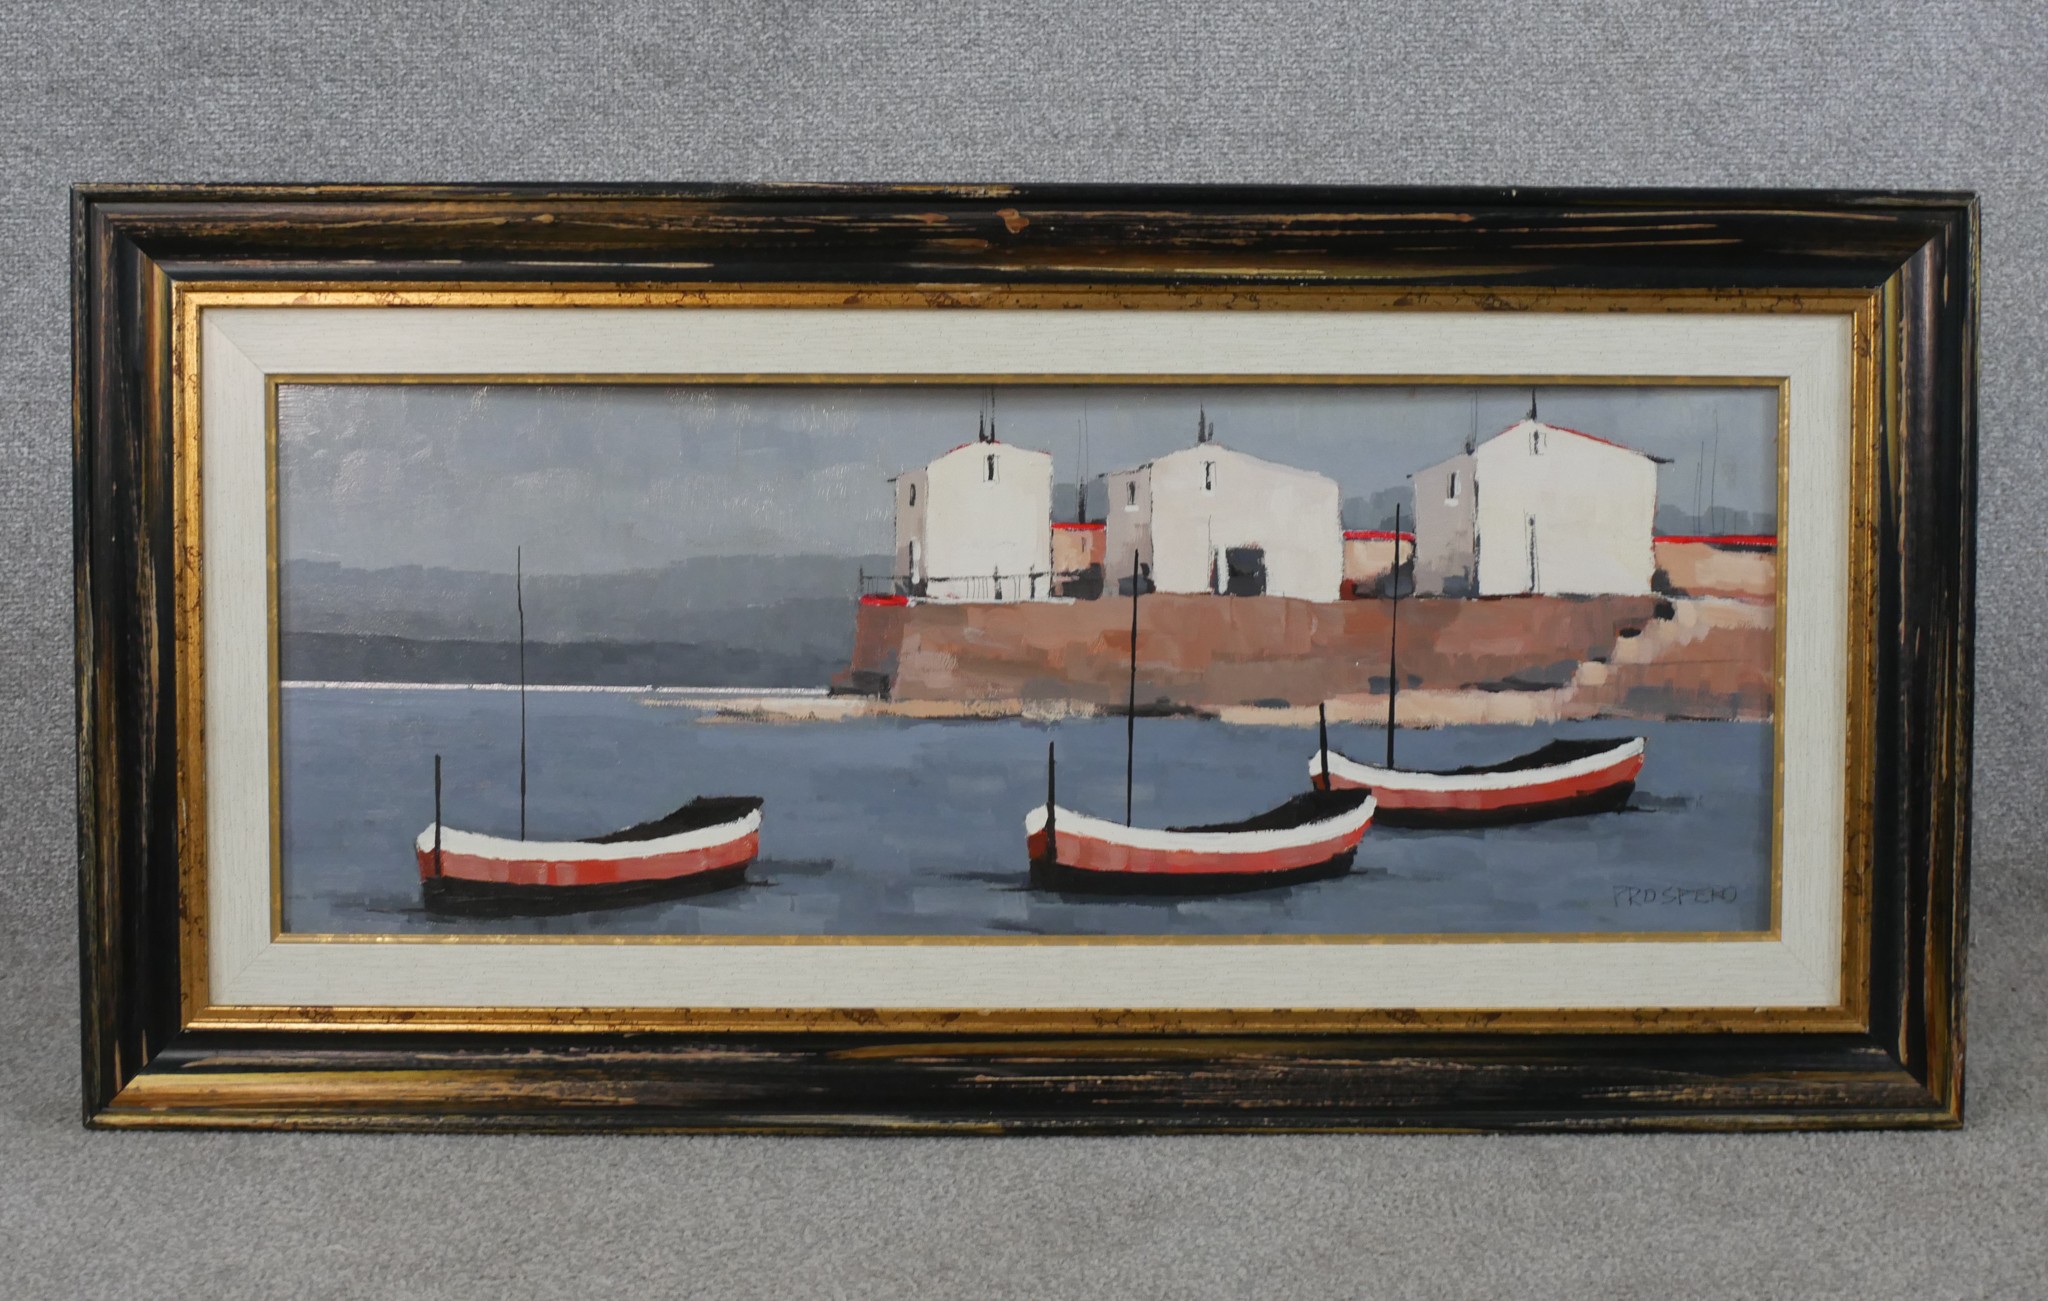 Prospero (20th century), three red and white boats on the sea, oil on board, signed and framed, - Image 2 of 5